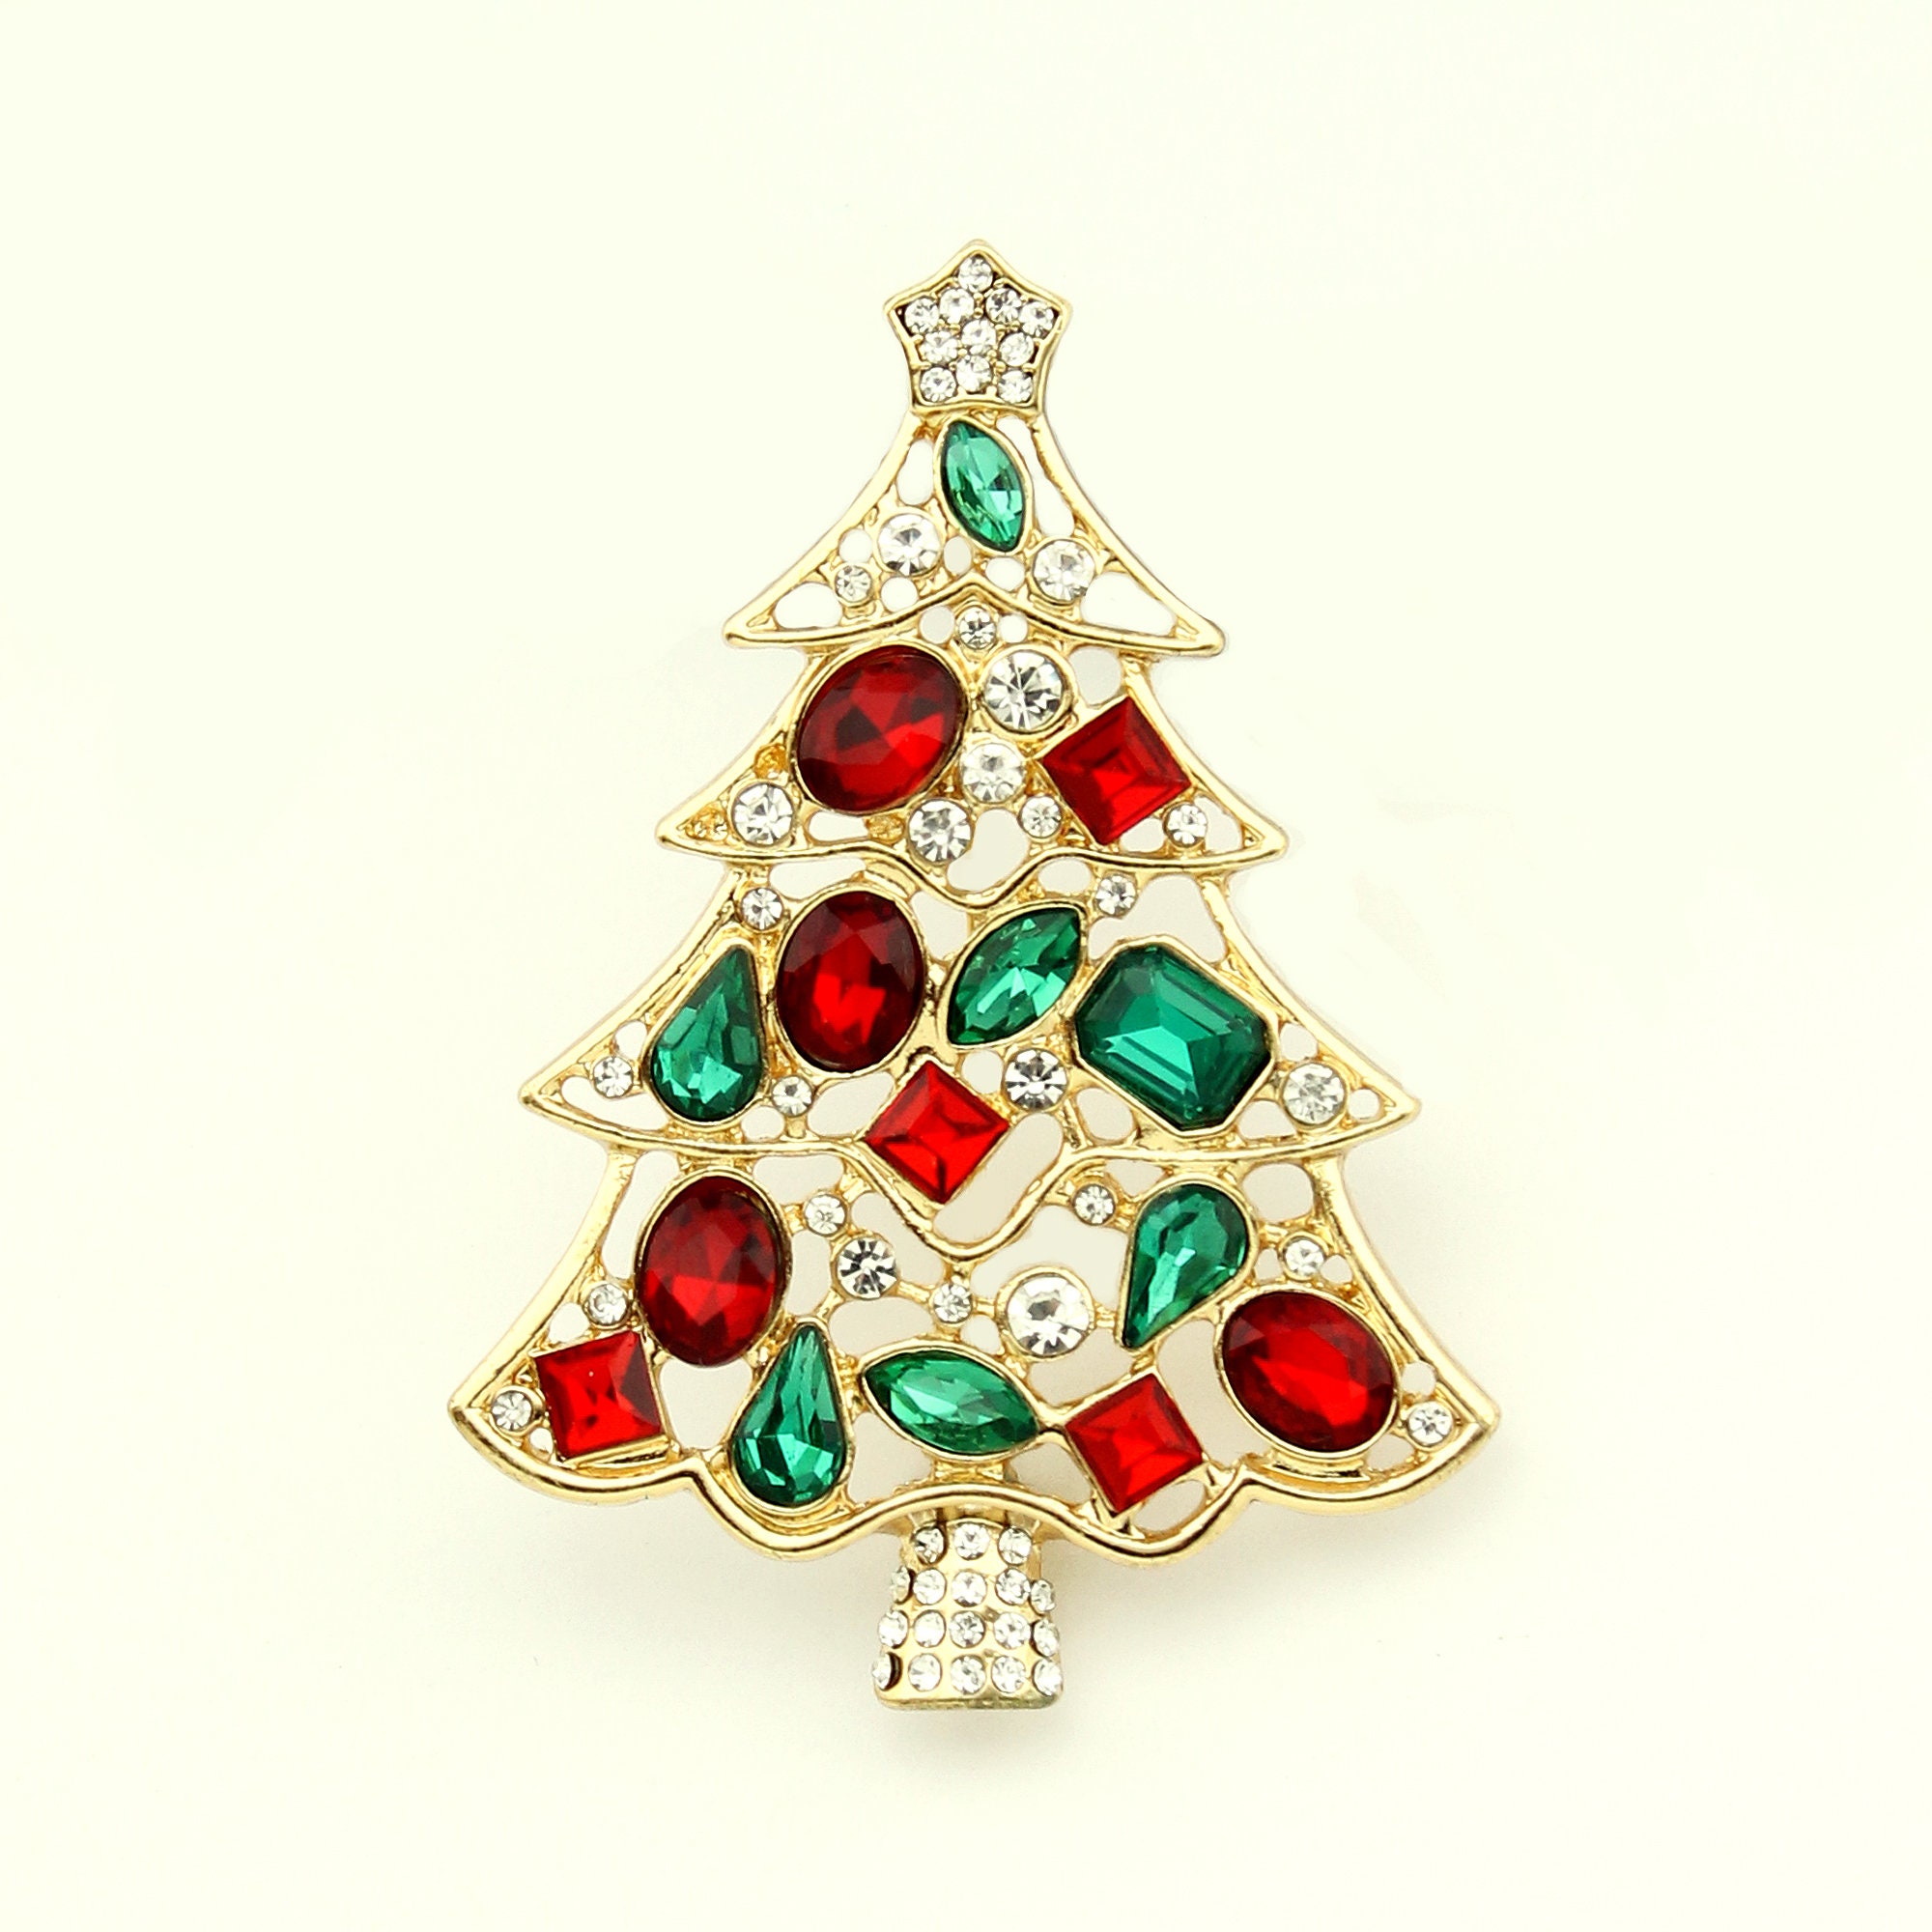 Christmas Ornament Pins Pearl Pins Corsage - 80 Teardrop Pearl Headed Pins  - 2.5 Long - Christmas Colors of Red, Green, Gold & White Pearl